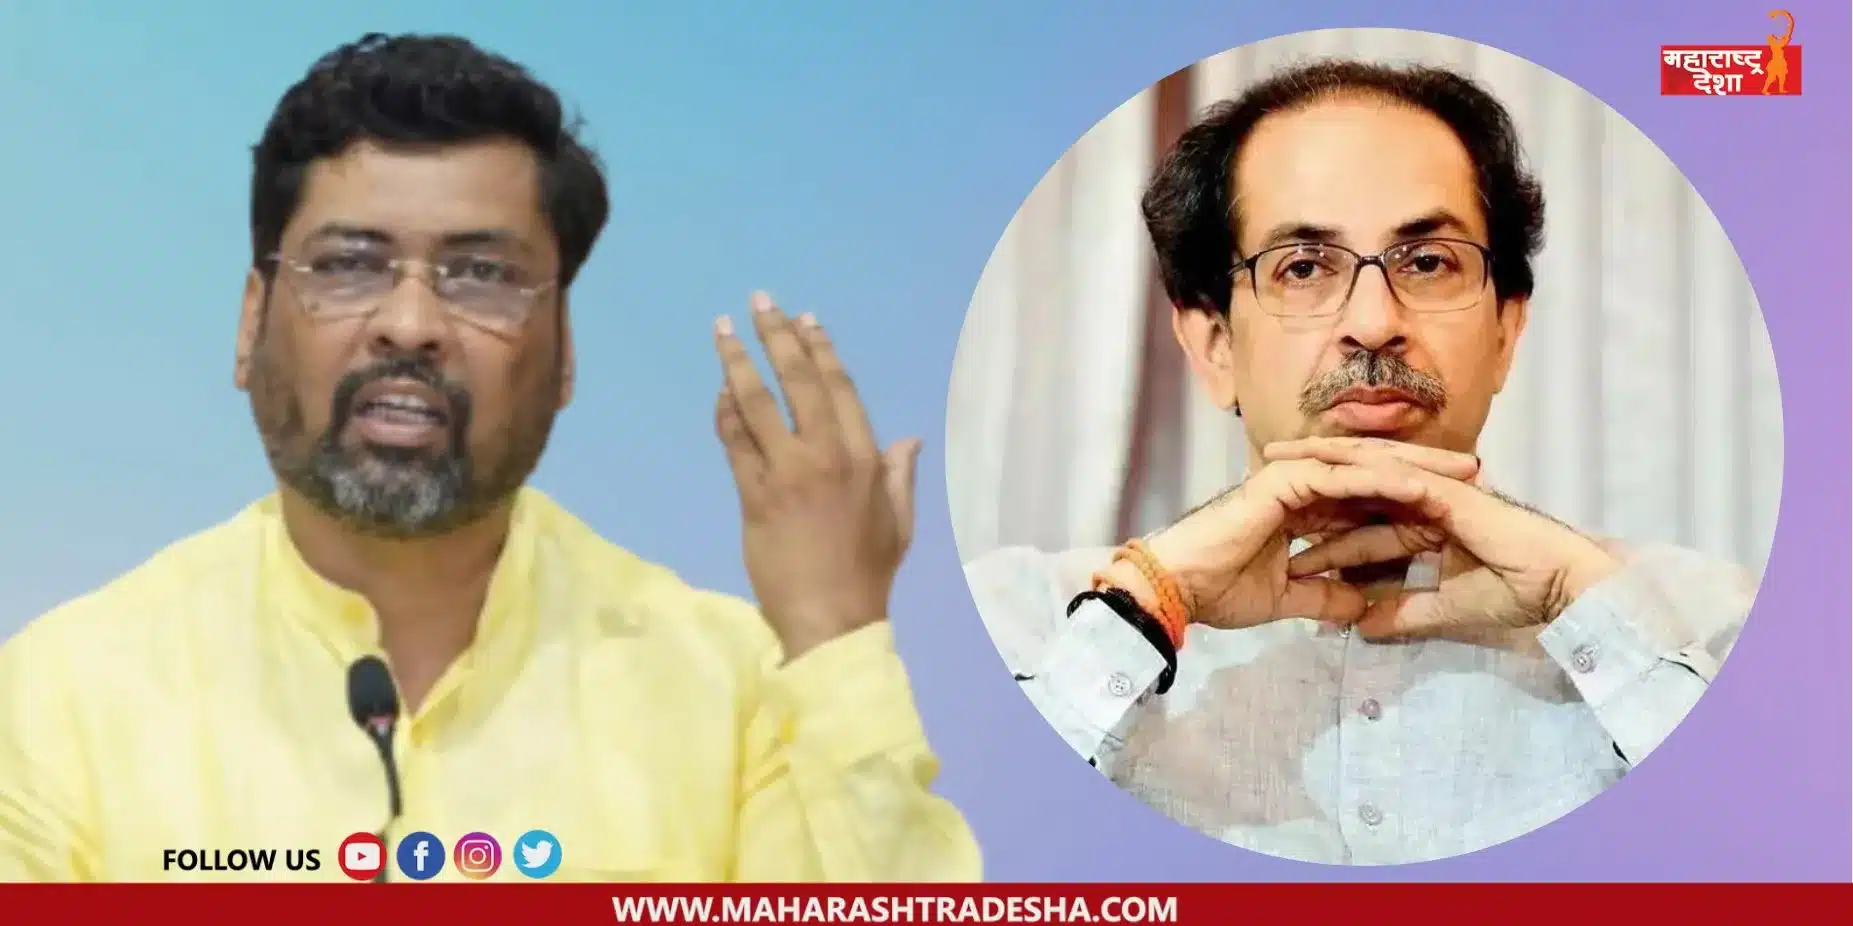 Keshav Upadhyay responded to the Thackeray group's criticism of the BJP